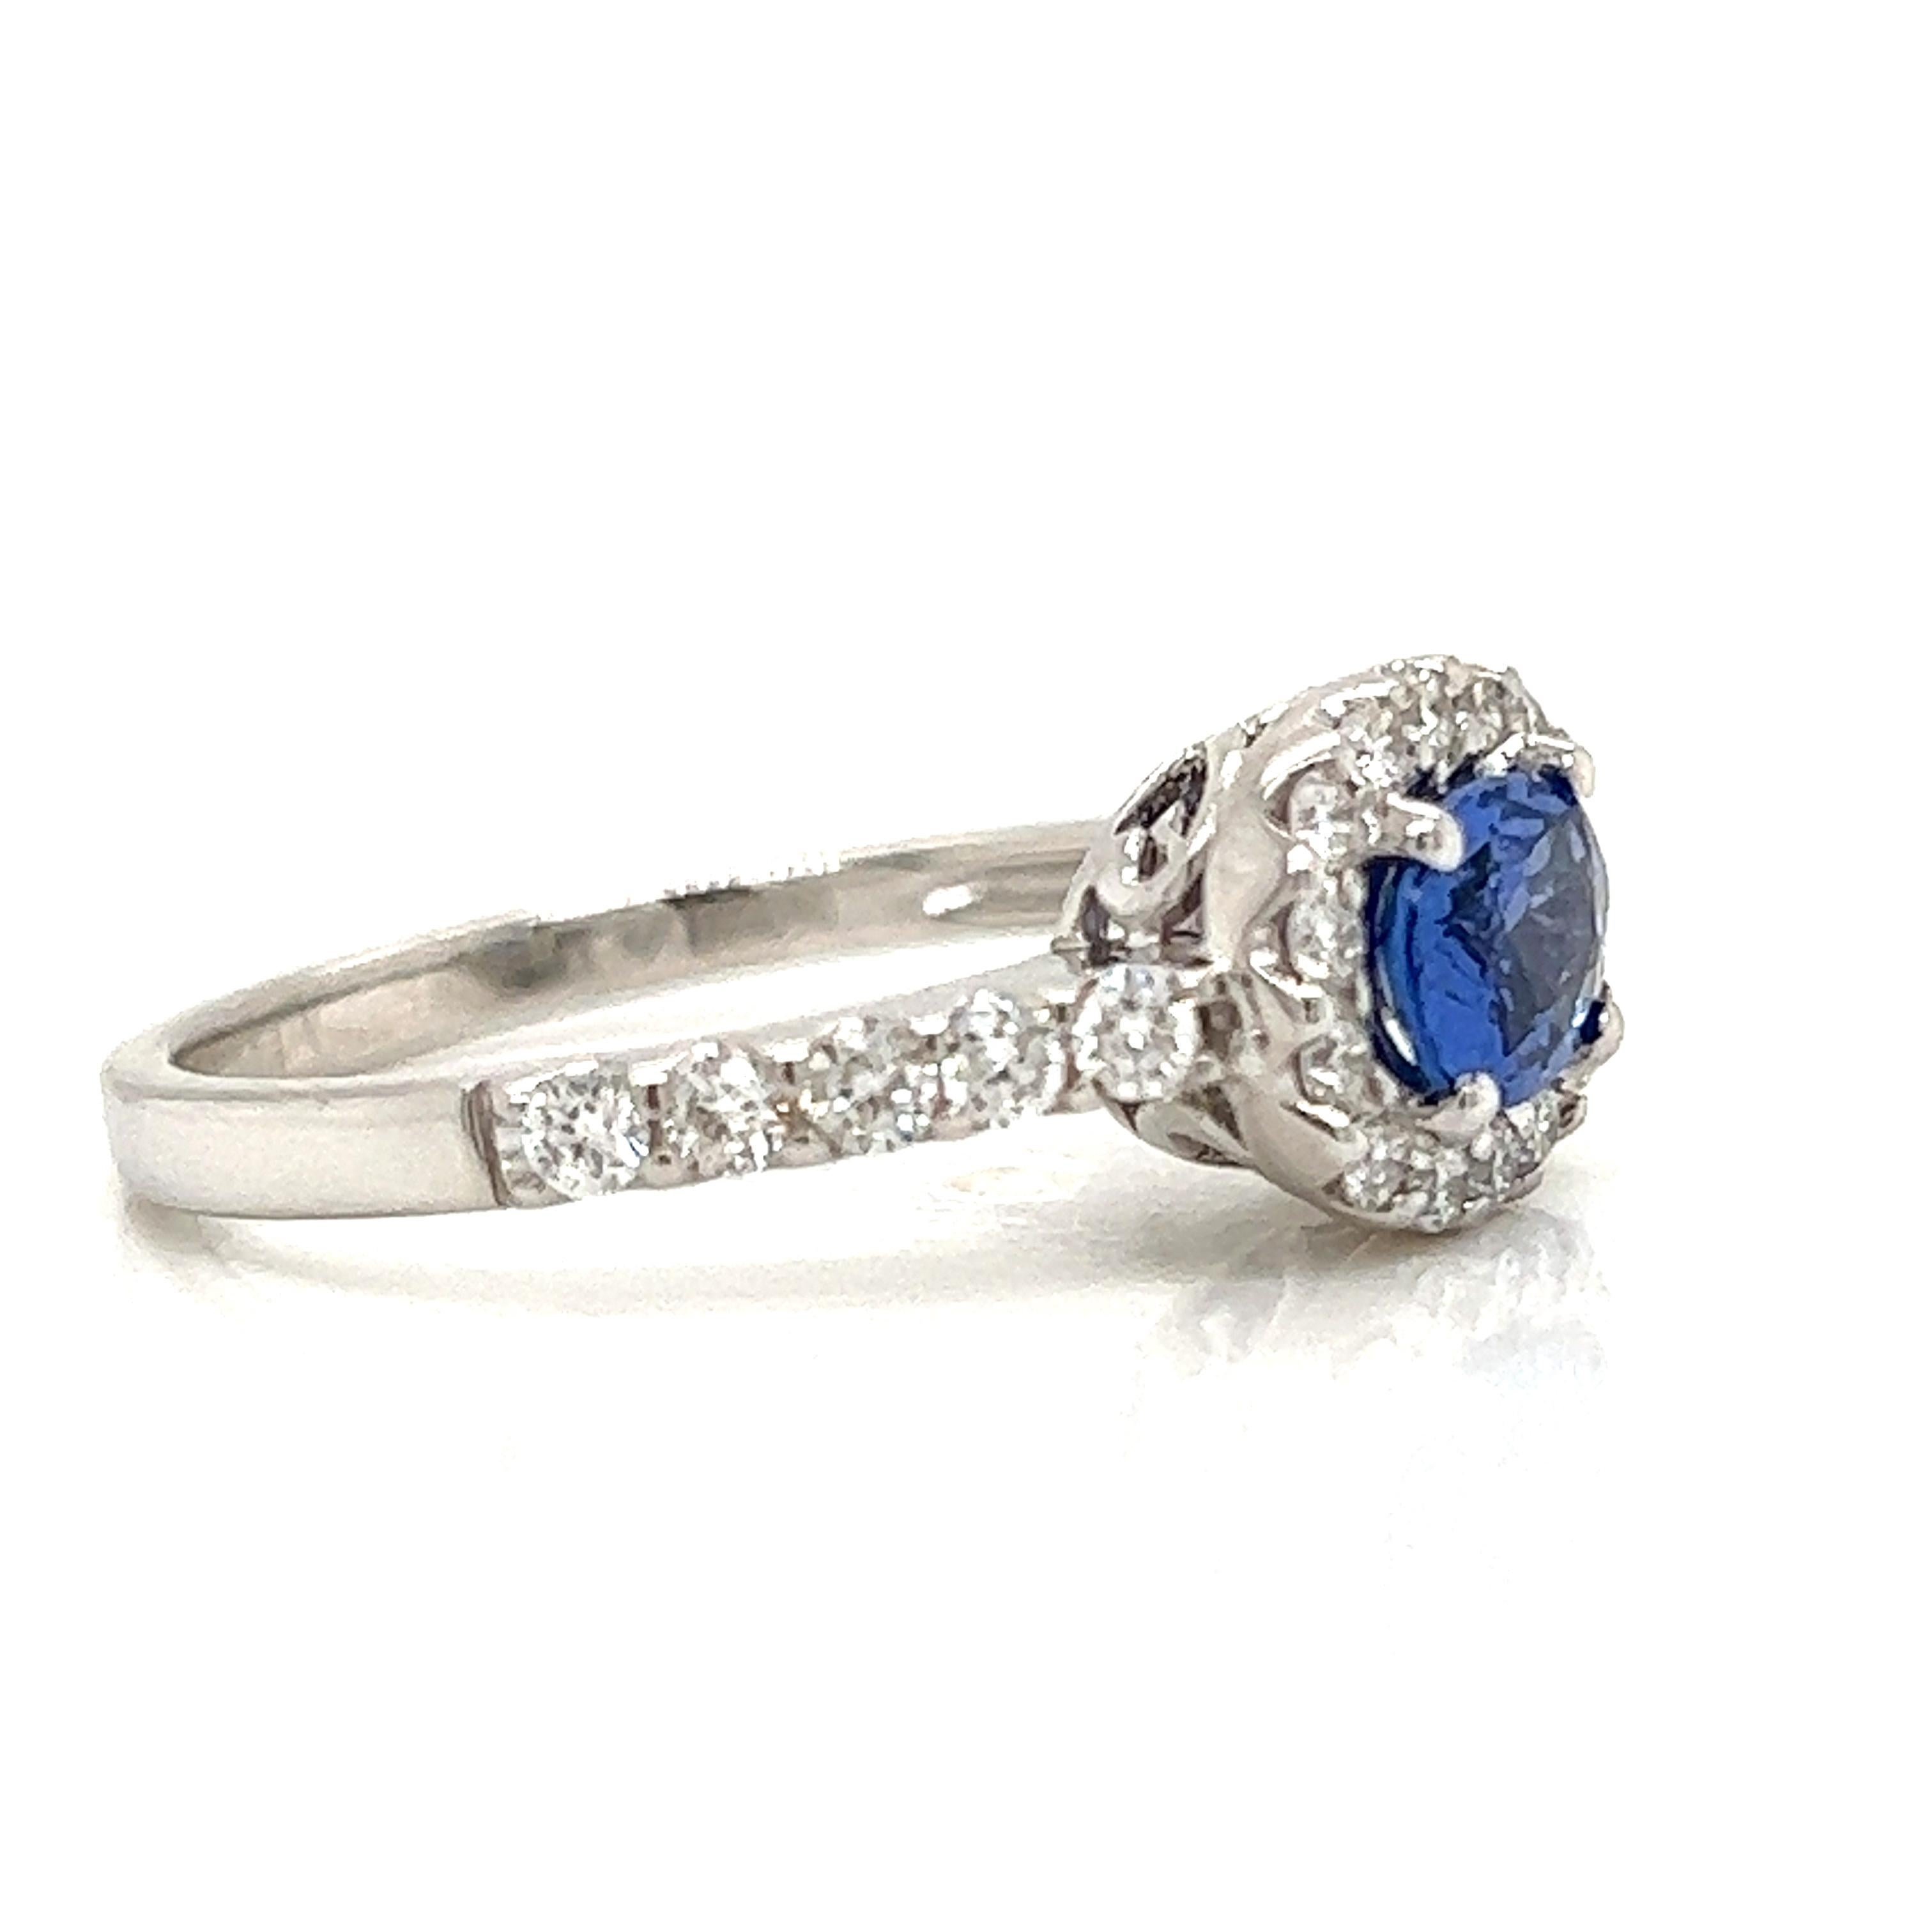 Elegant sapphire and diamond ring with a vivid 